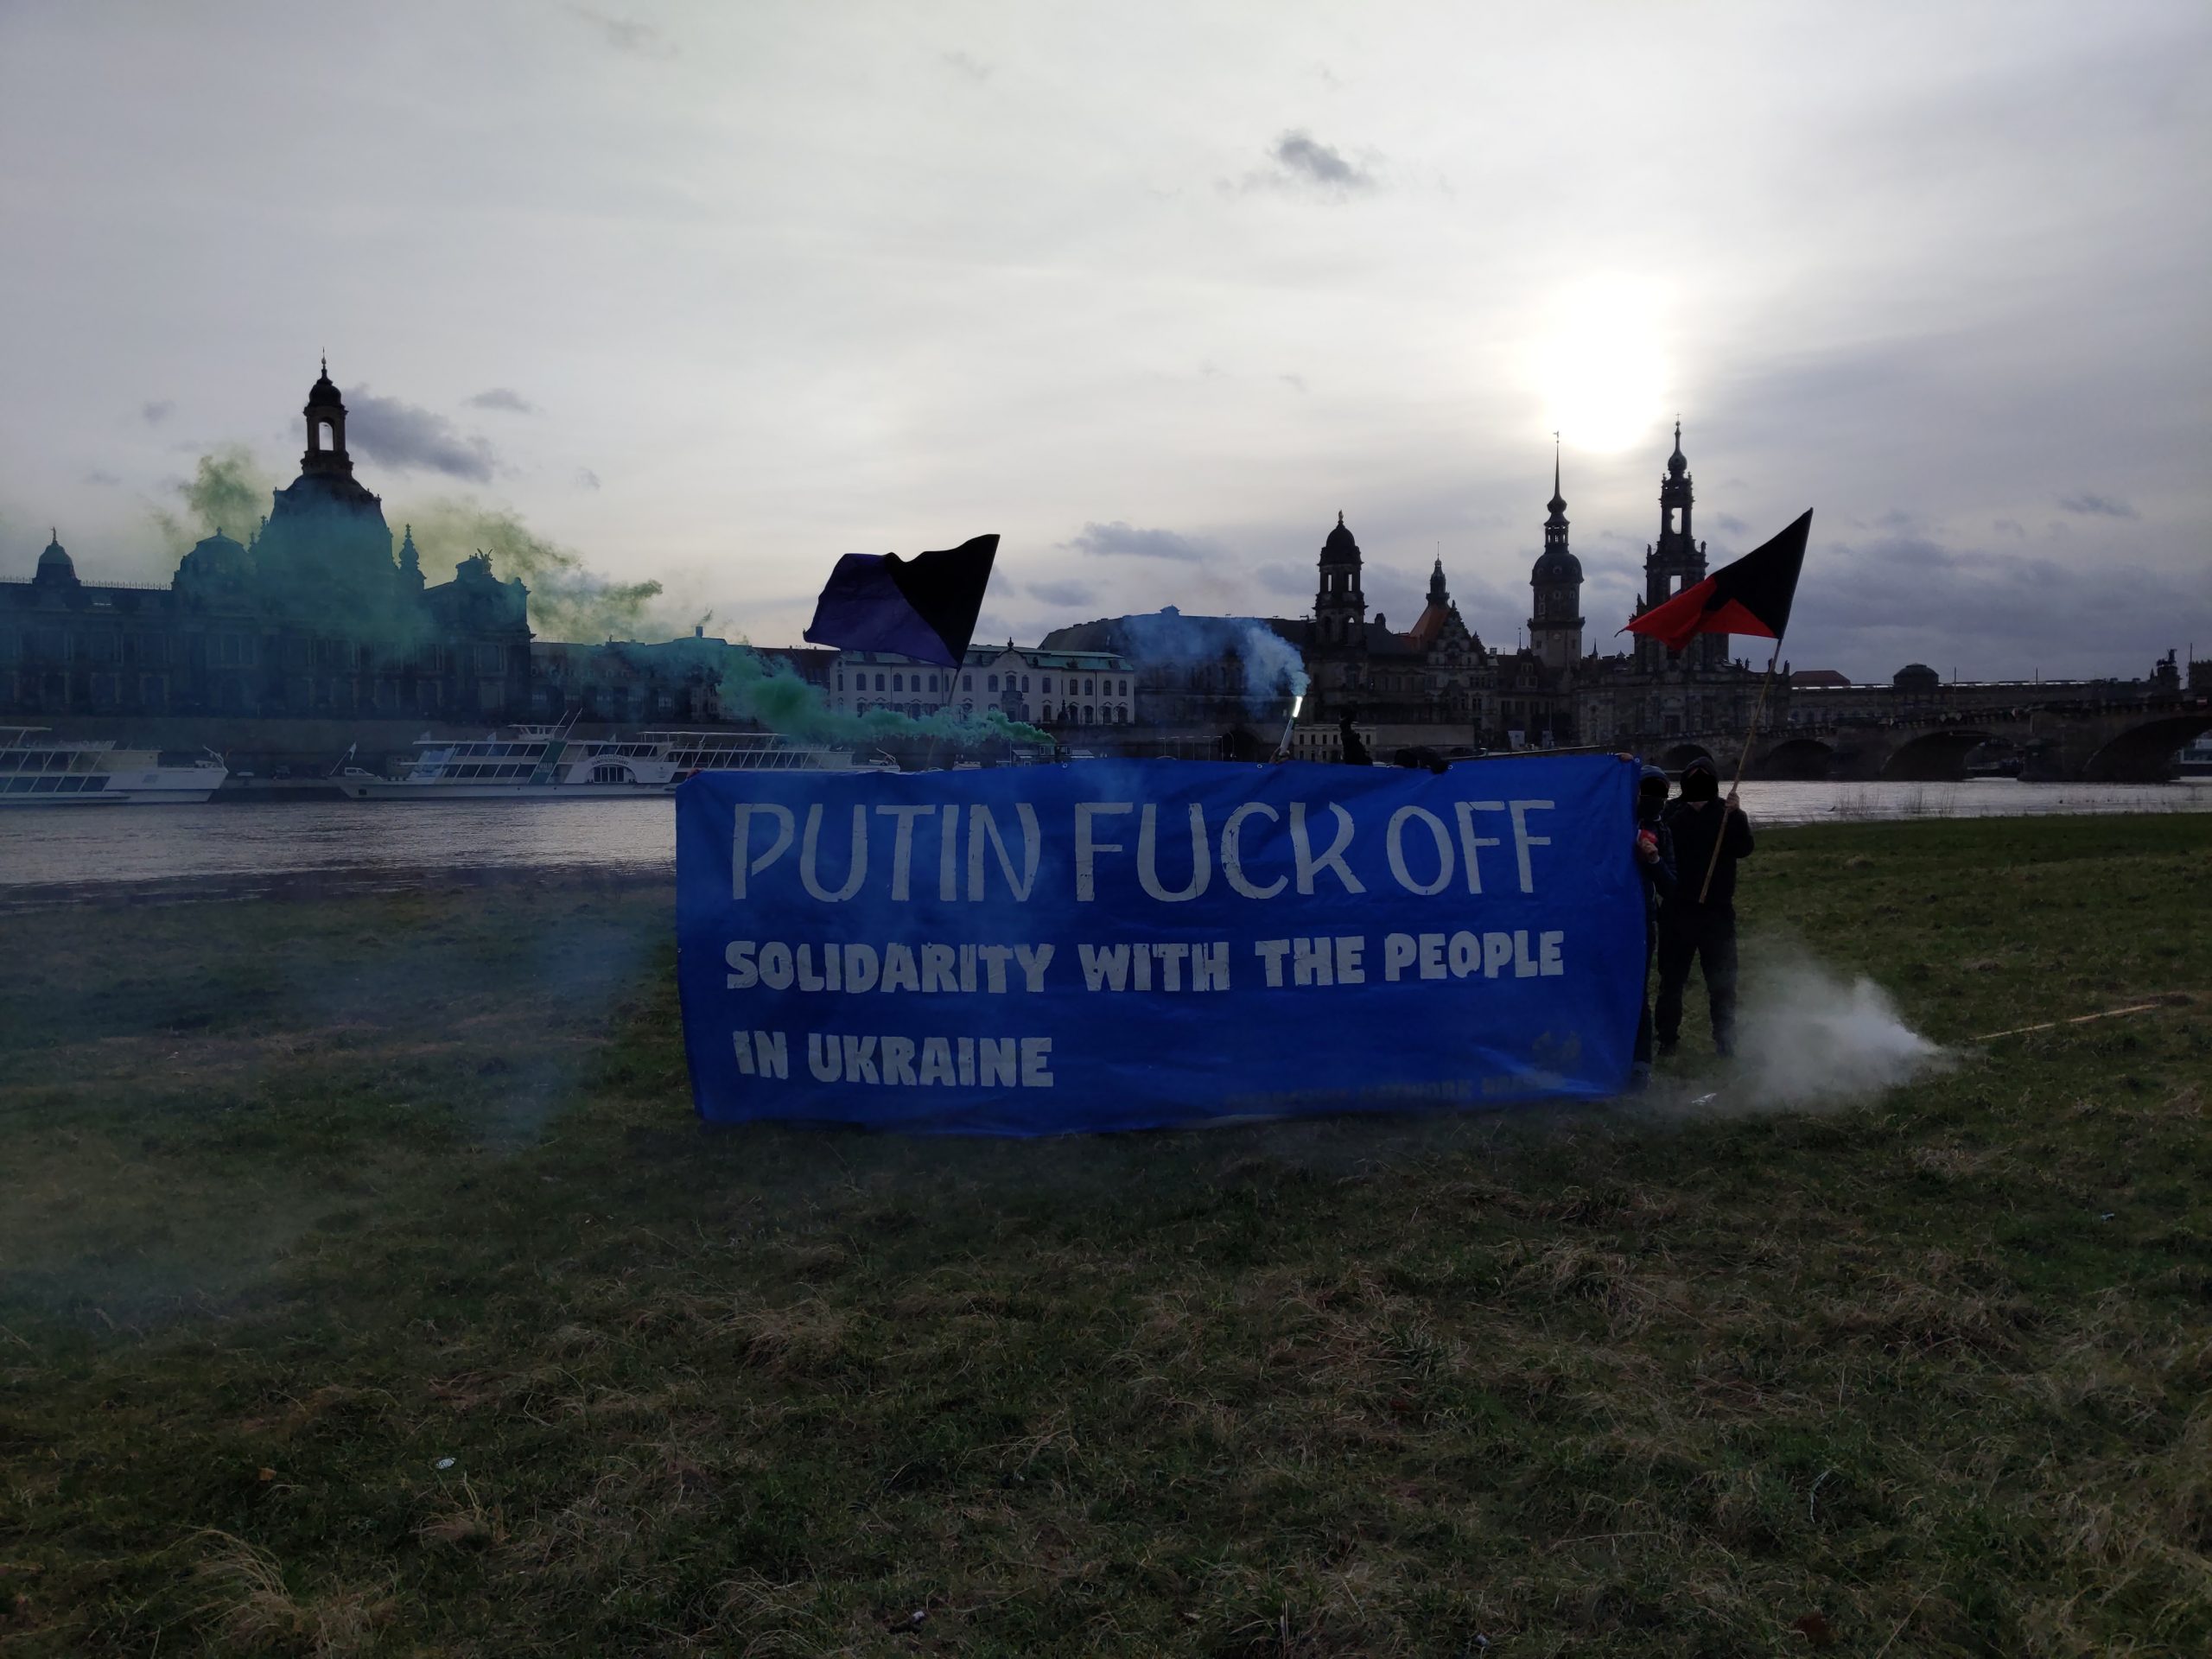 Spontaneous demo for solidarity with people in Ukraine